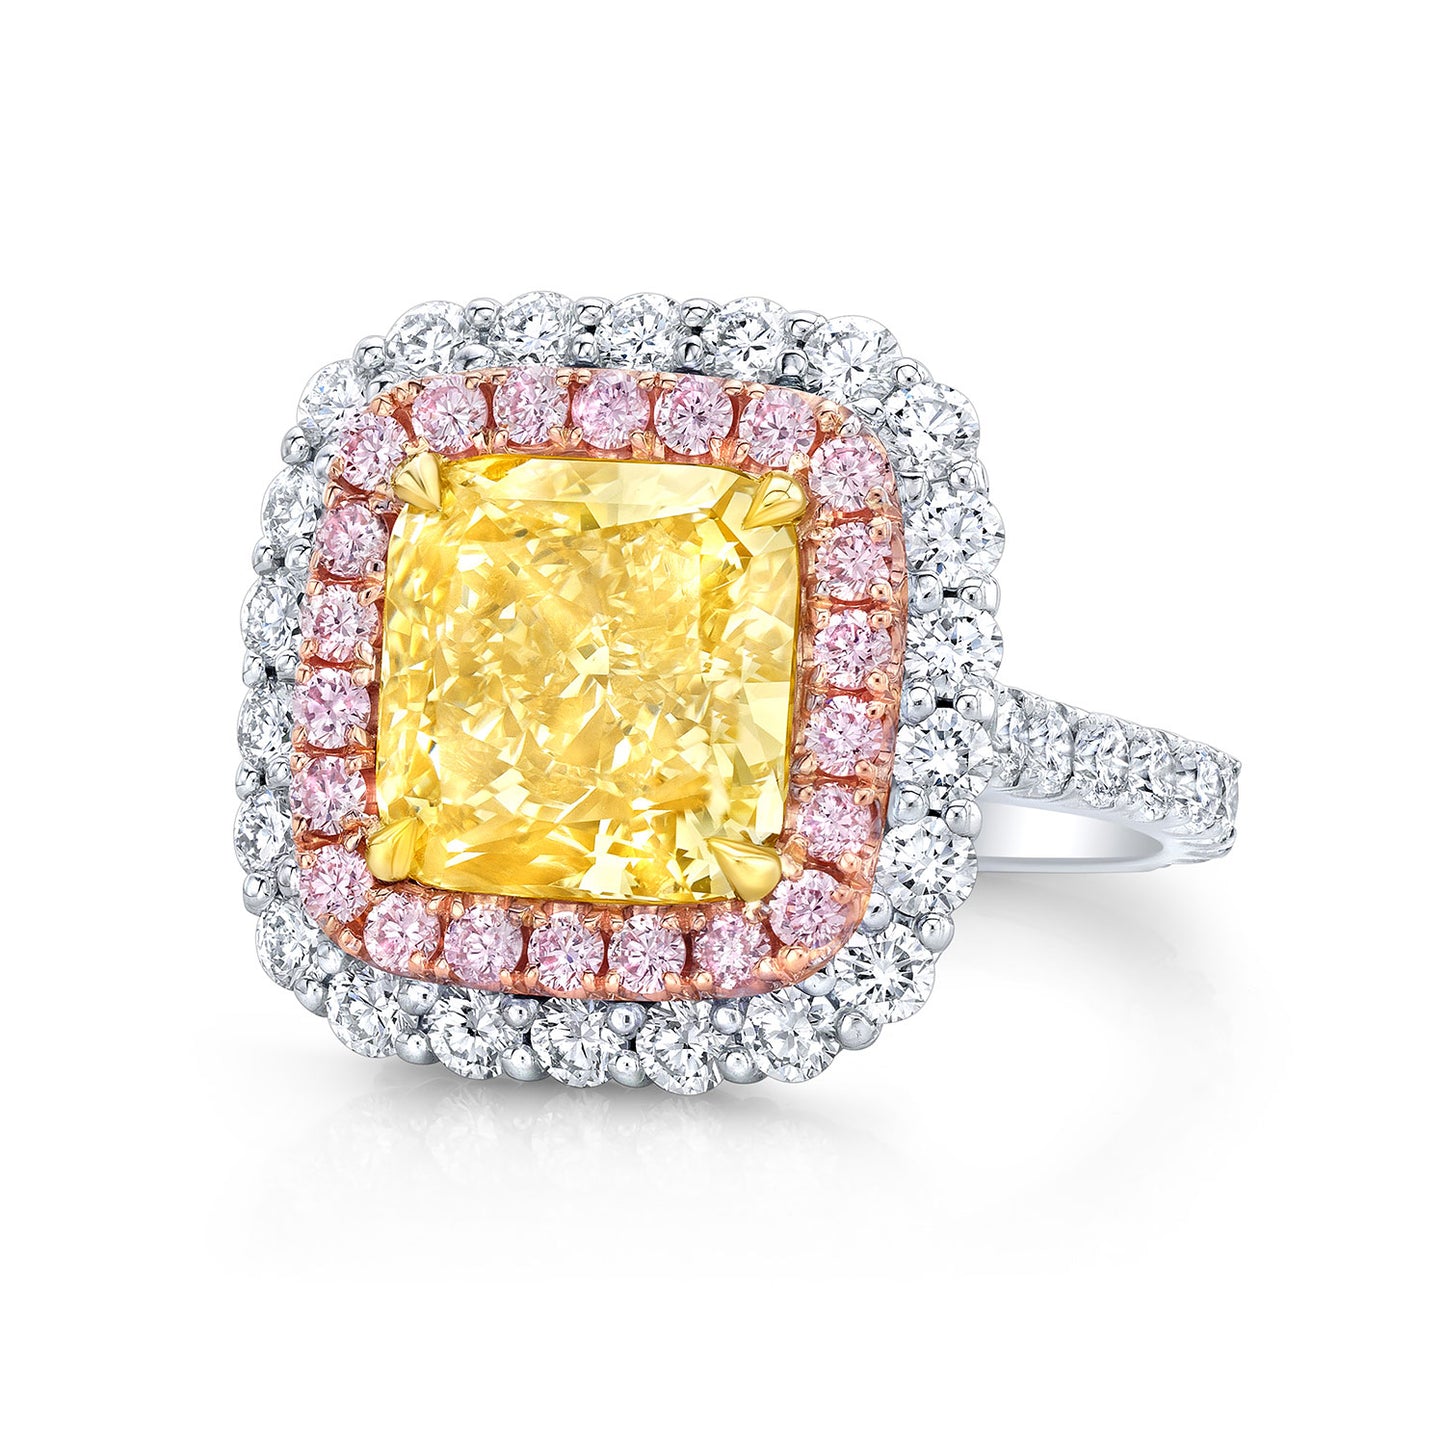 Double Halo Engagement Ring with Radiant Yellow Diamond